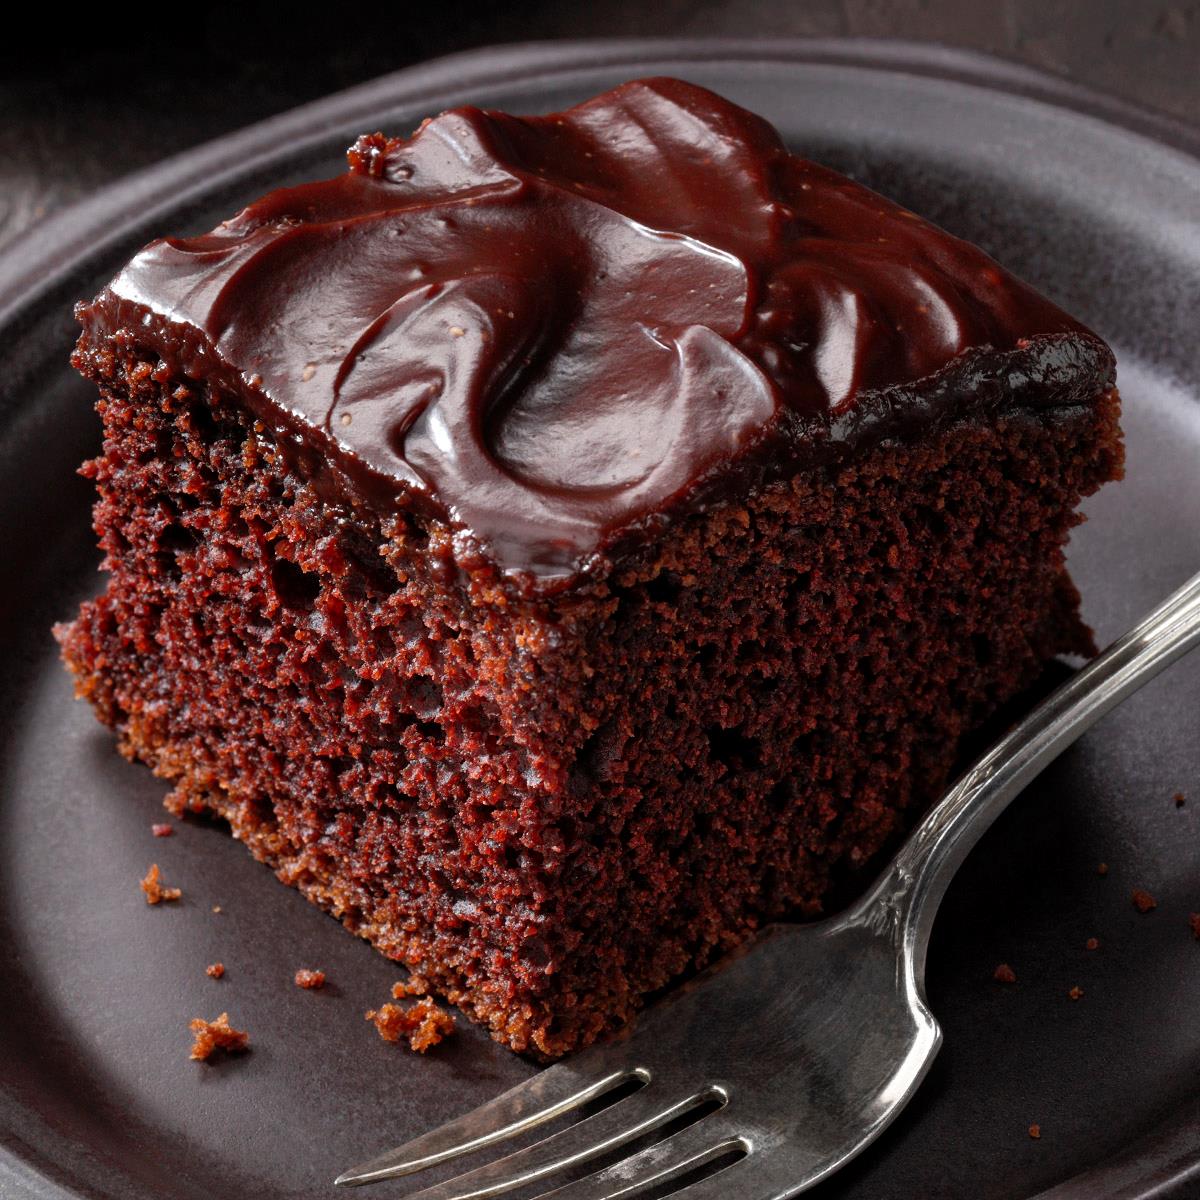 Details more than 55 chocolate cake and frosting latest ...